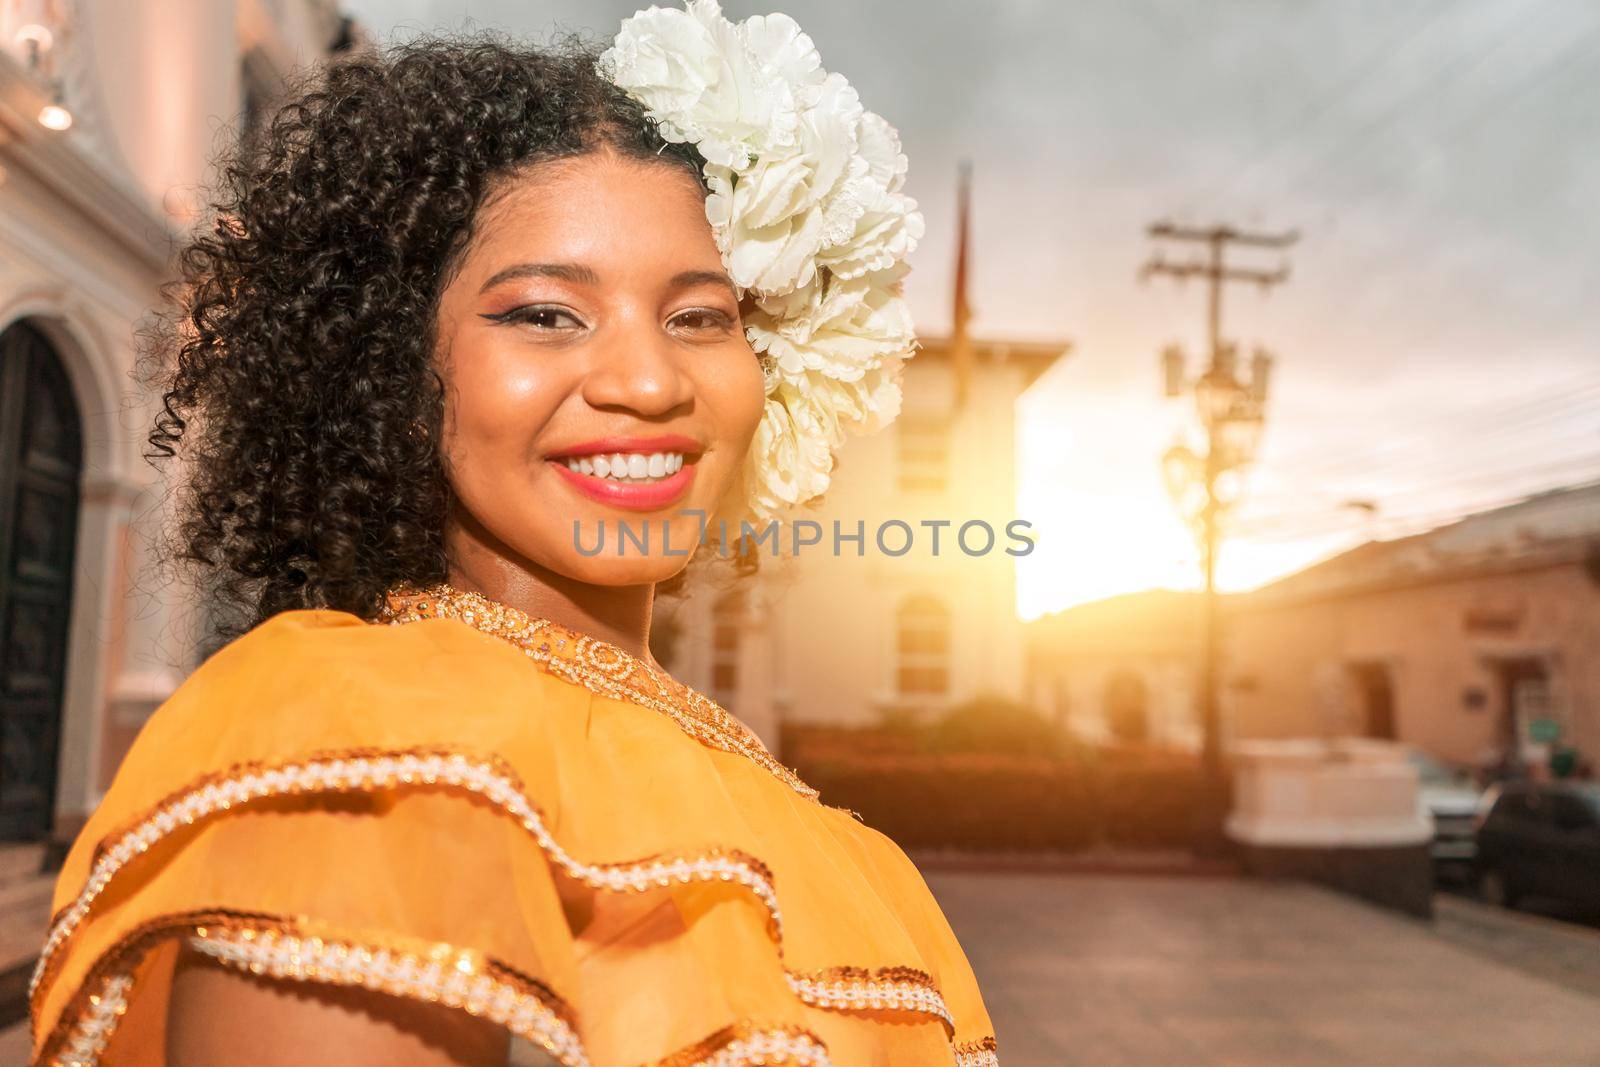 Mixed race teenager smiling wearing the classic Nicaraguan dress and flowers in her curly hair at sunset outside a colonial building